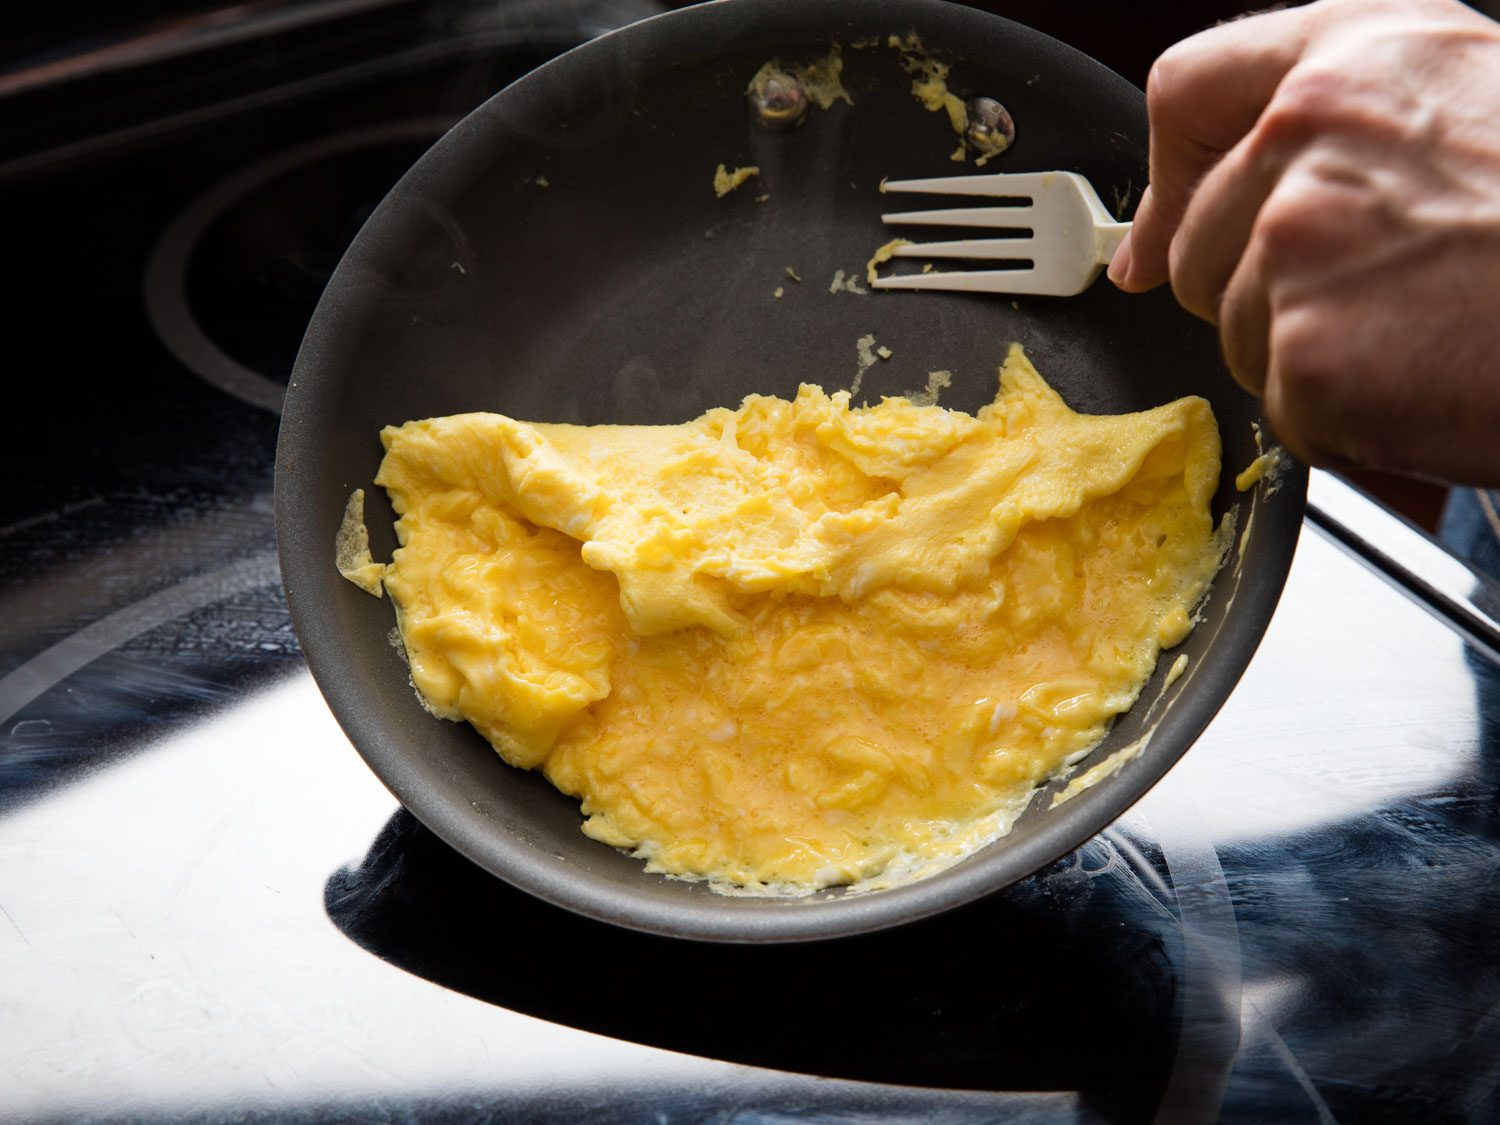 Using a plastic fork to scrape large curds of scrambled eggs toward the center of a nonstick skillet